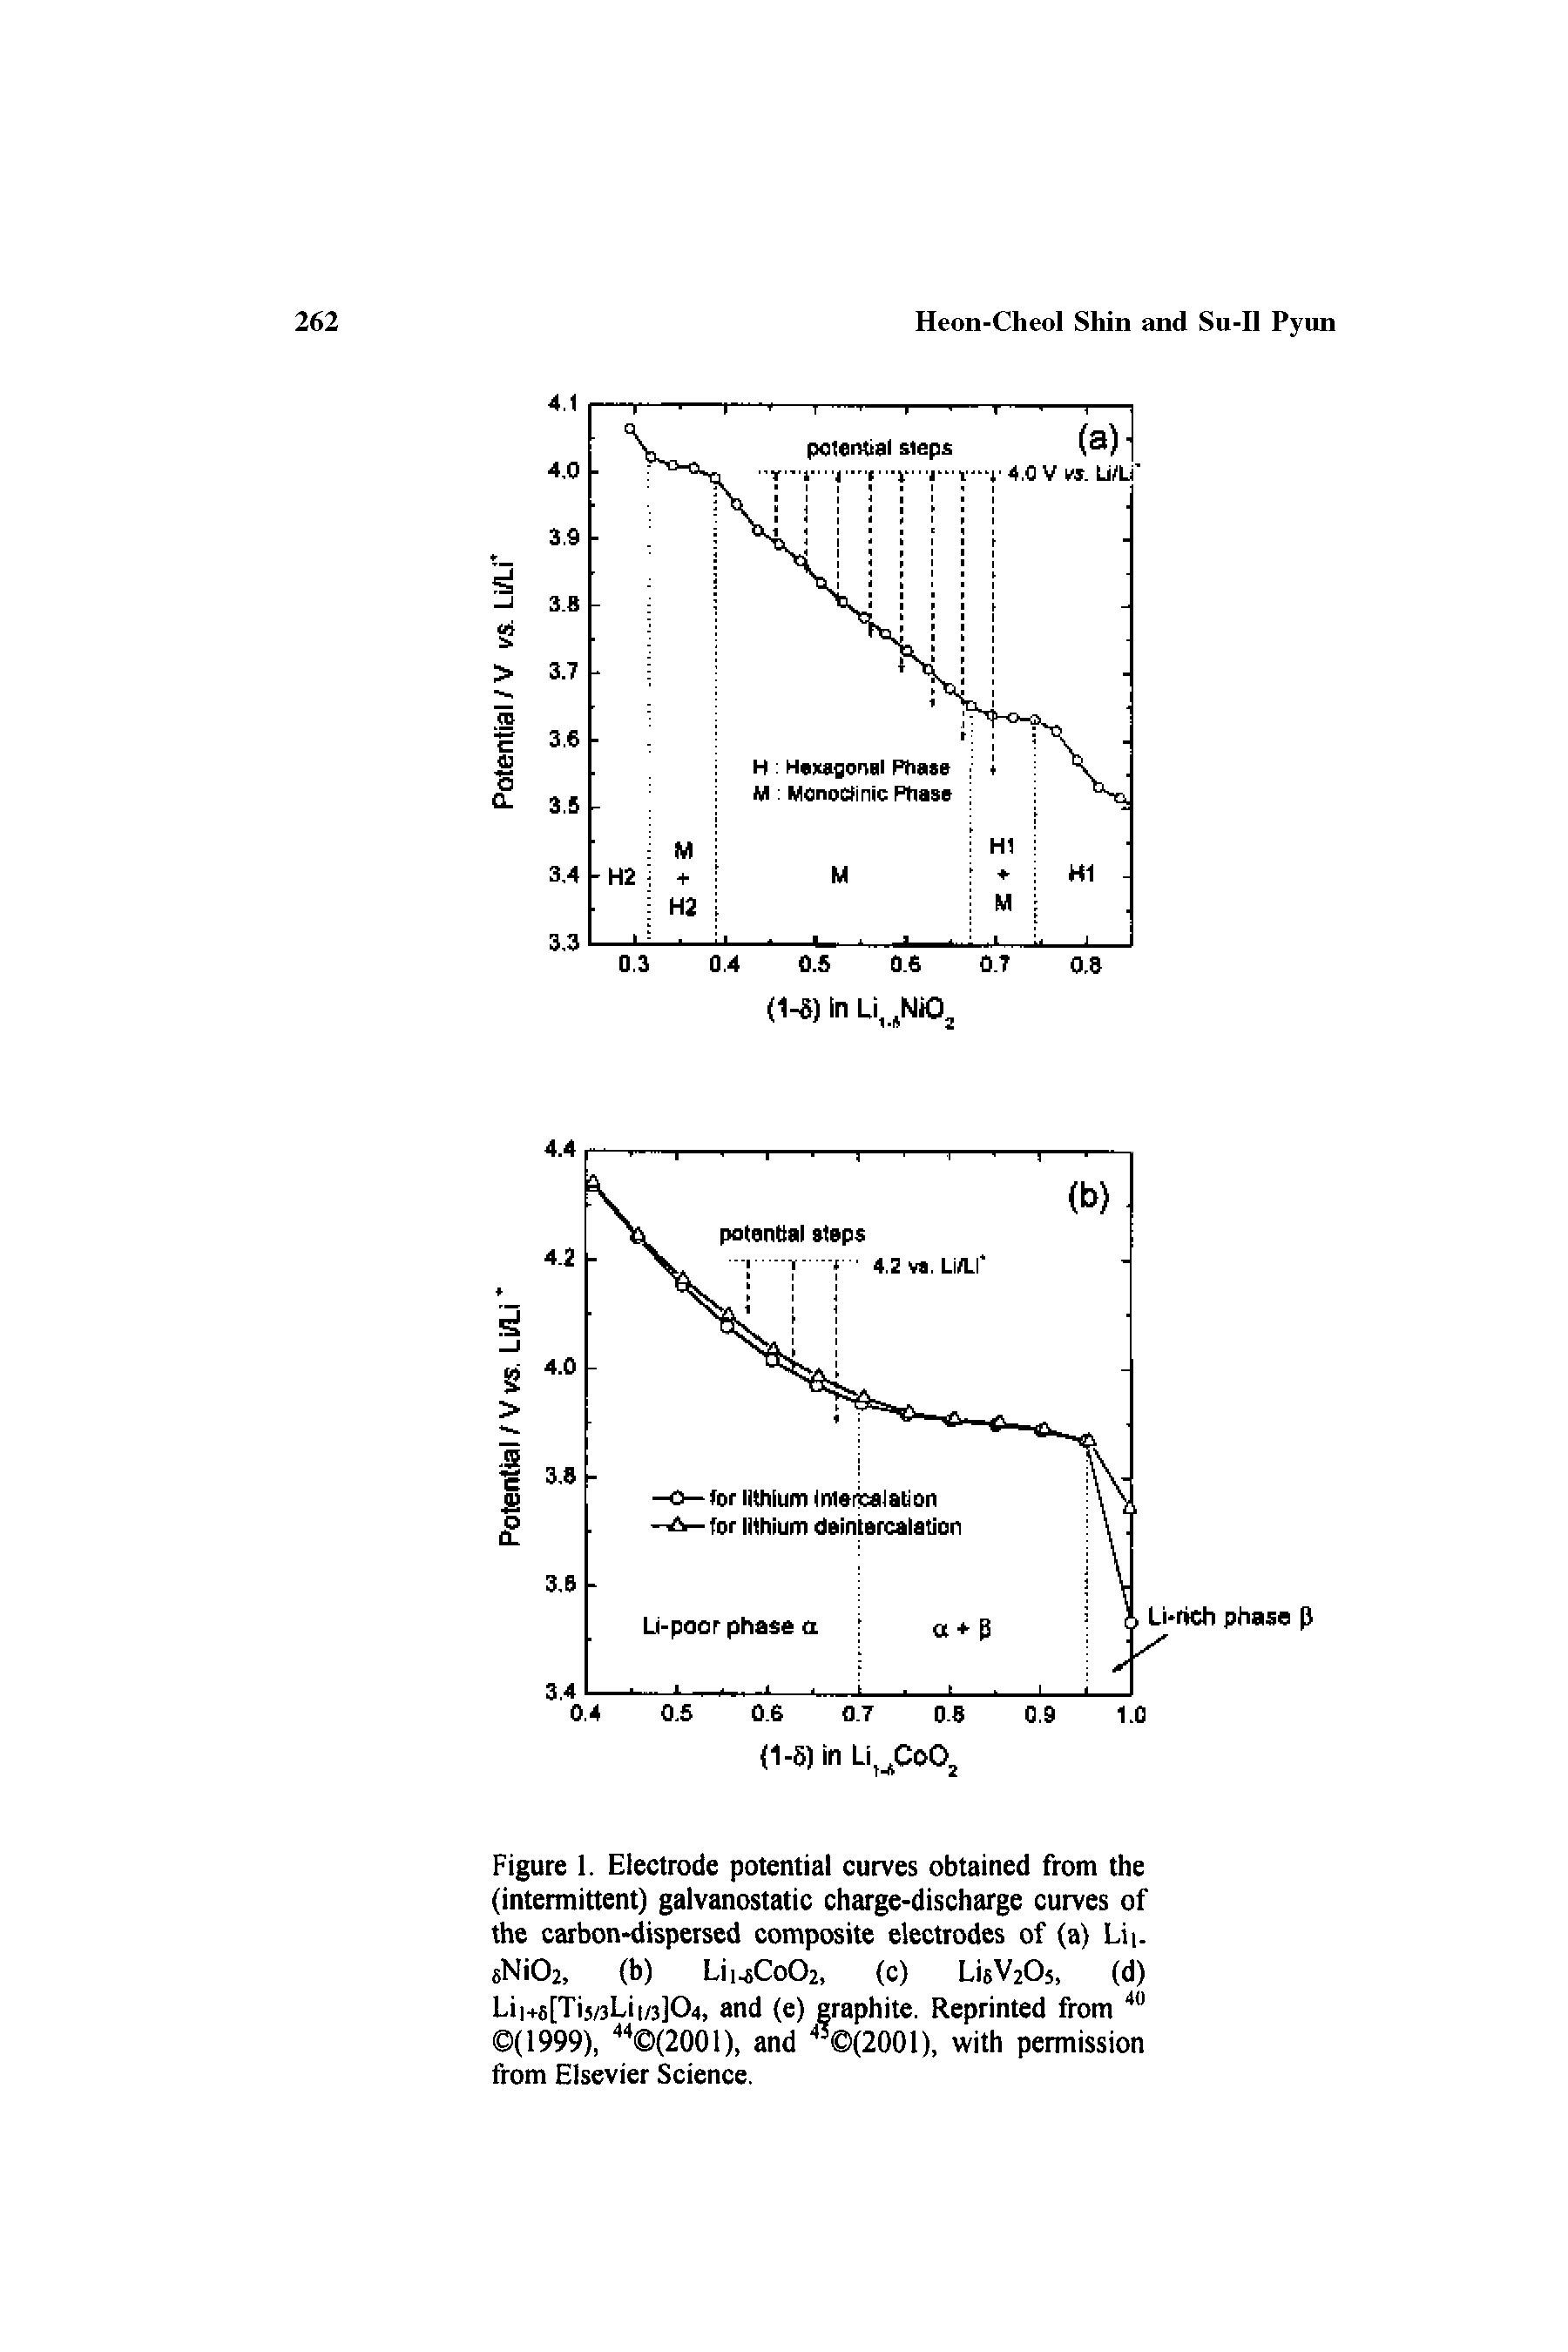 Figure 1. Electrode potential curves obtained from the (intermittent) galvanostatic charge-discharge curves of the carbon-dispersed composite electrodes of (a) Lii. sNiOa, (b) Lii Co02, (c) Li6V20s, (d) Lii+6[Ti5/3Li /3]04, and (e) graphite. Reprinted from (1999), (2001), and (2001), with permission from Elsevier Science.